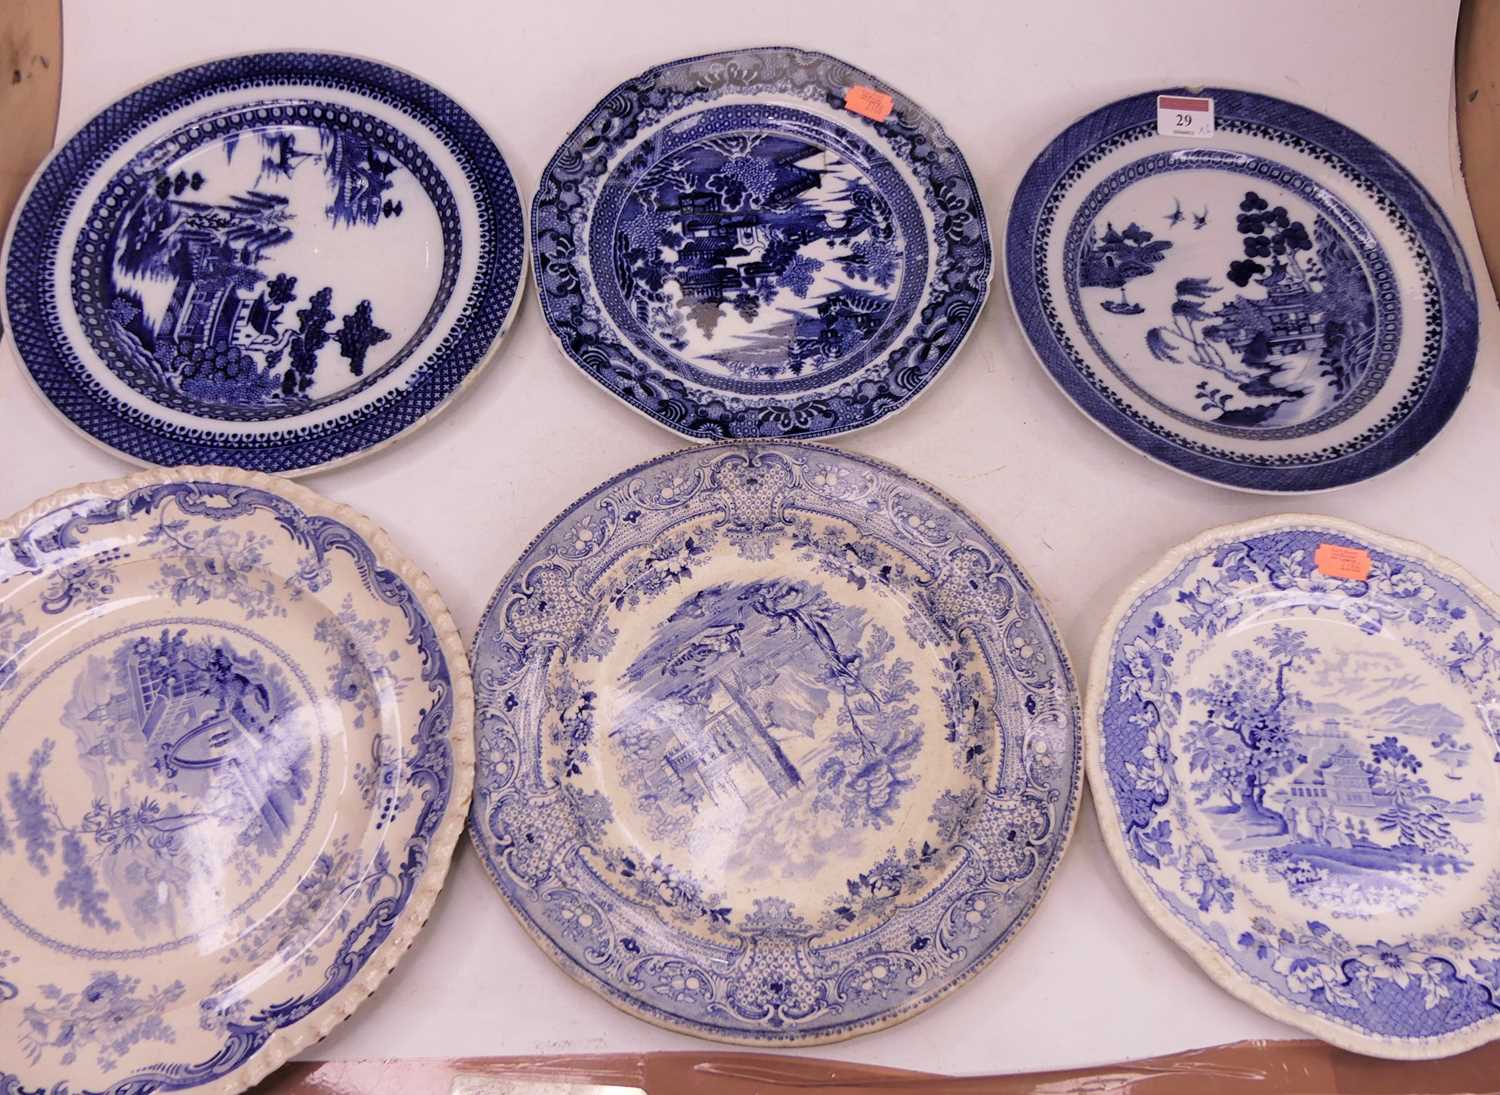 A 19th century Chinese export blue and white transfer decorated porcelain plate, in the Willow